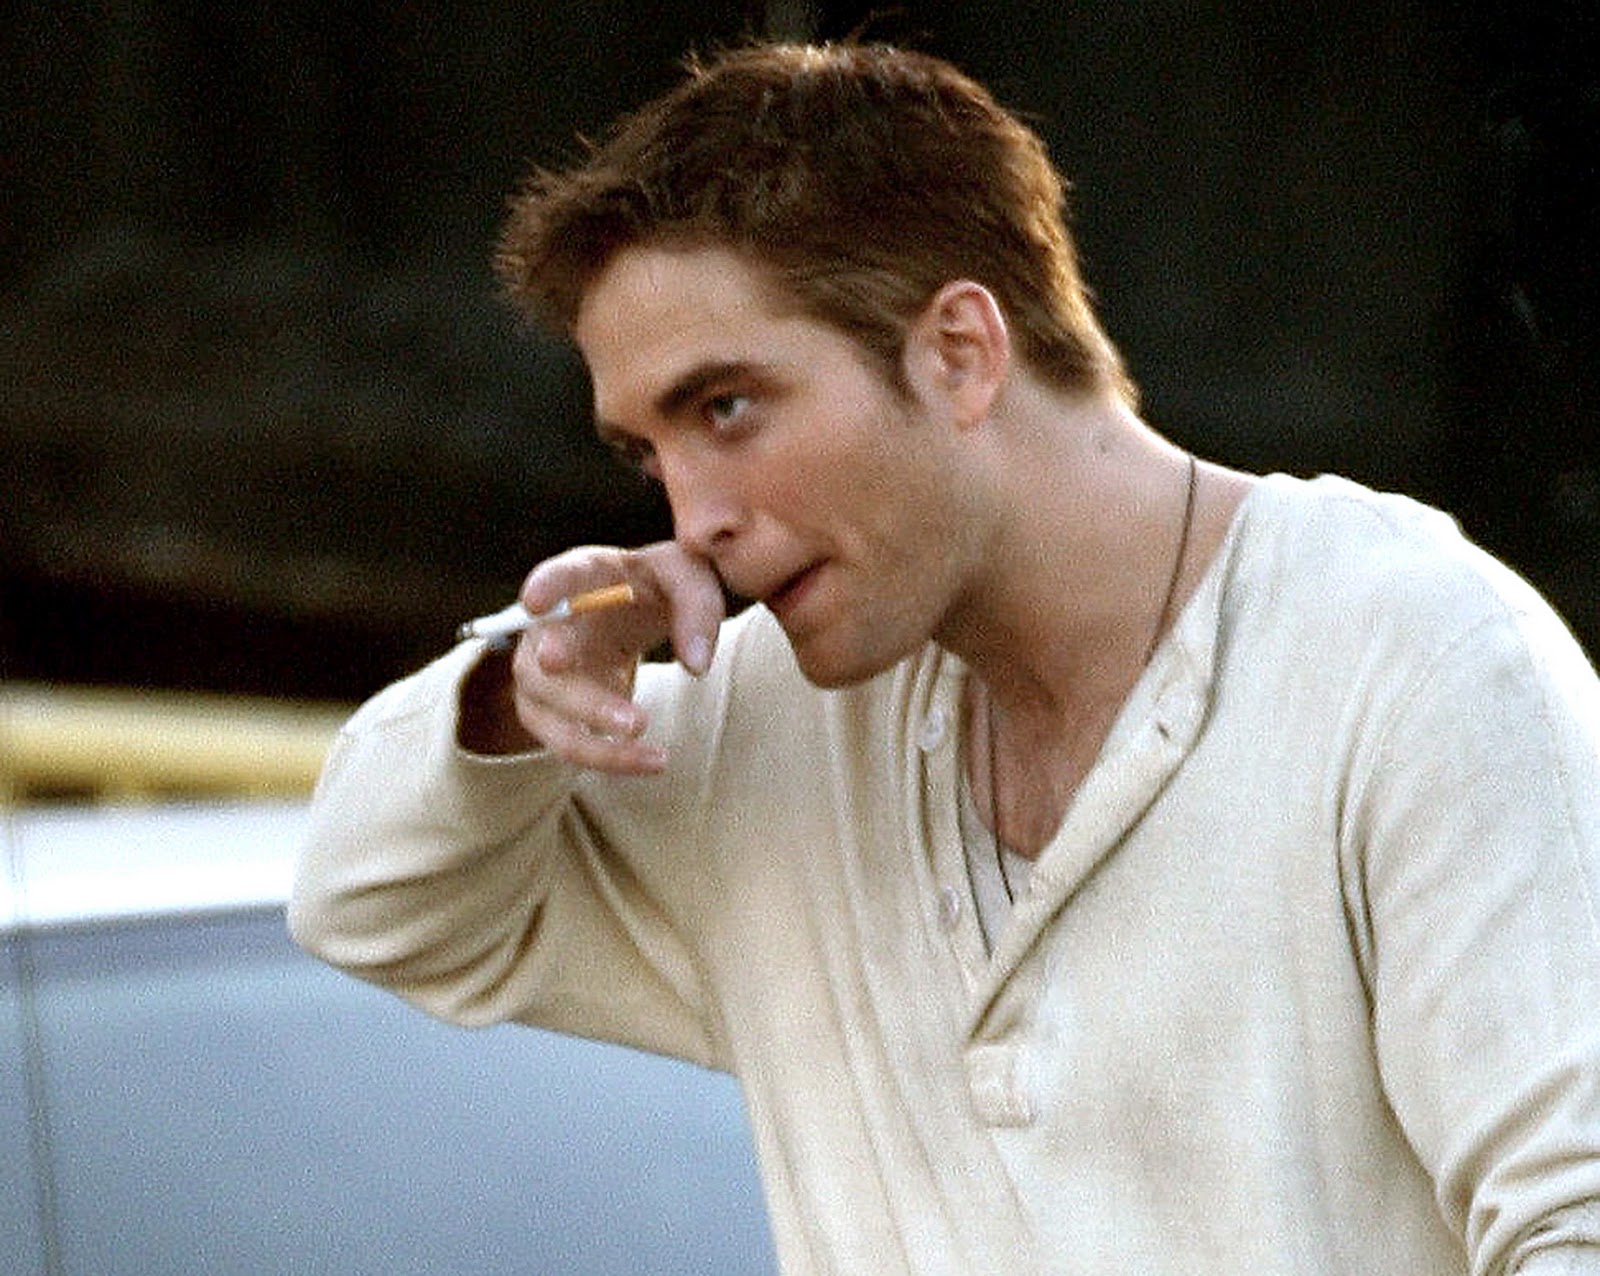 Pattinson Gallery: HQ Pictures of Robert Pattinson on WFE Set Yesterday1600 x 1276